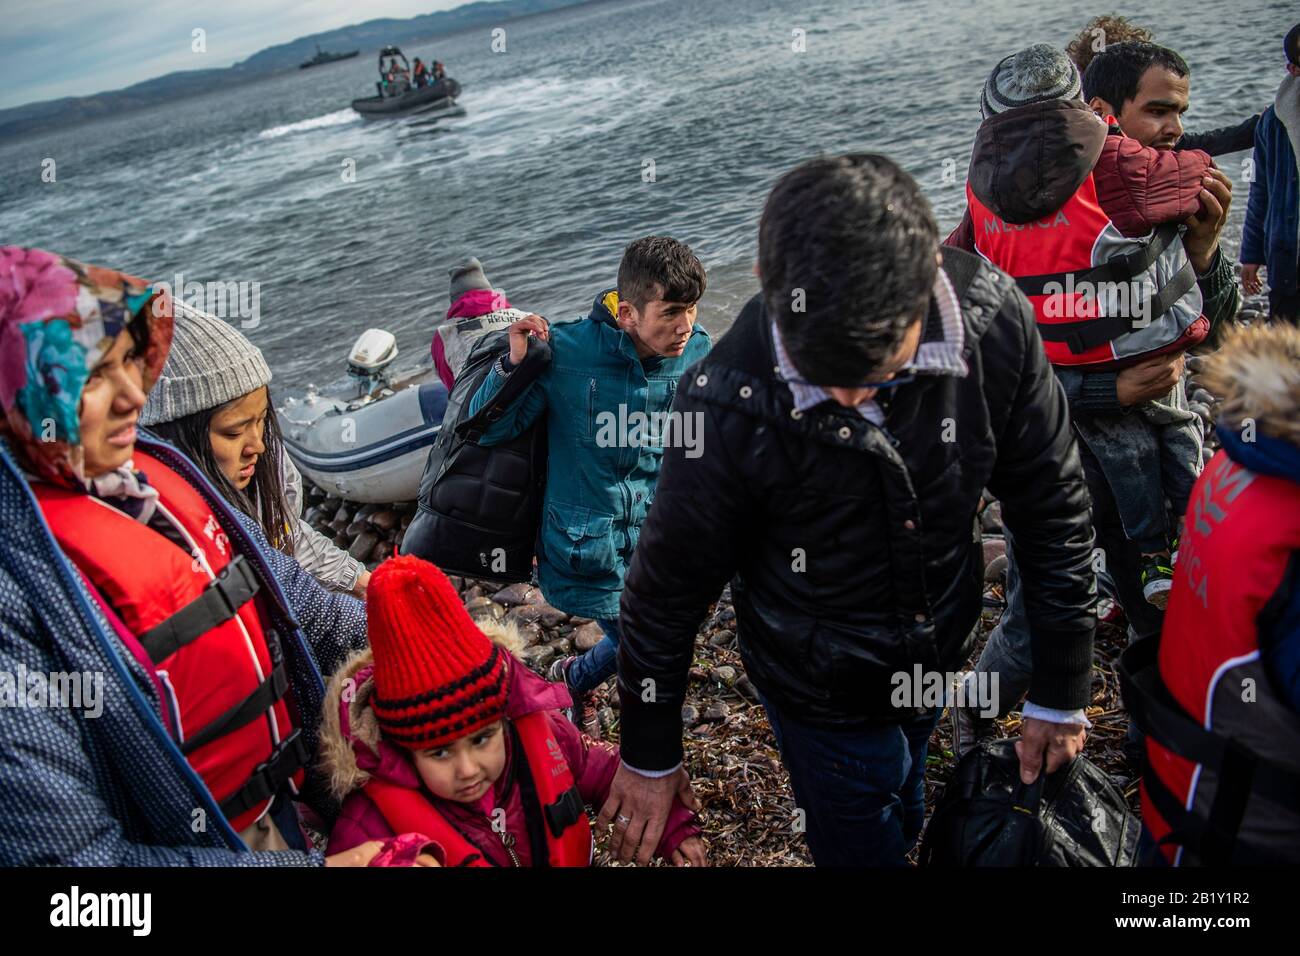 Lesbos, Greece. 28th Feb, 2020. A boat with 15 Afghan refugees, five children, three women and seven men, arrives on the Greek island of Lesbos, in front of the patrol boat of the British border troops HMC Valiant, which is part of the Frontex mission. According to the state news agency Anadolu, a spokesman for the Turkish ruling party AKP barely concealed his threat to open the borders to the refugees in the country. Credit: Angelos Tzortzinis/dpa/Alamy Live News Stock Photo